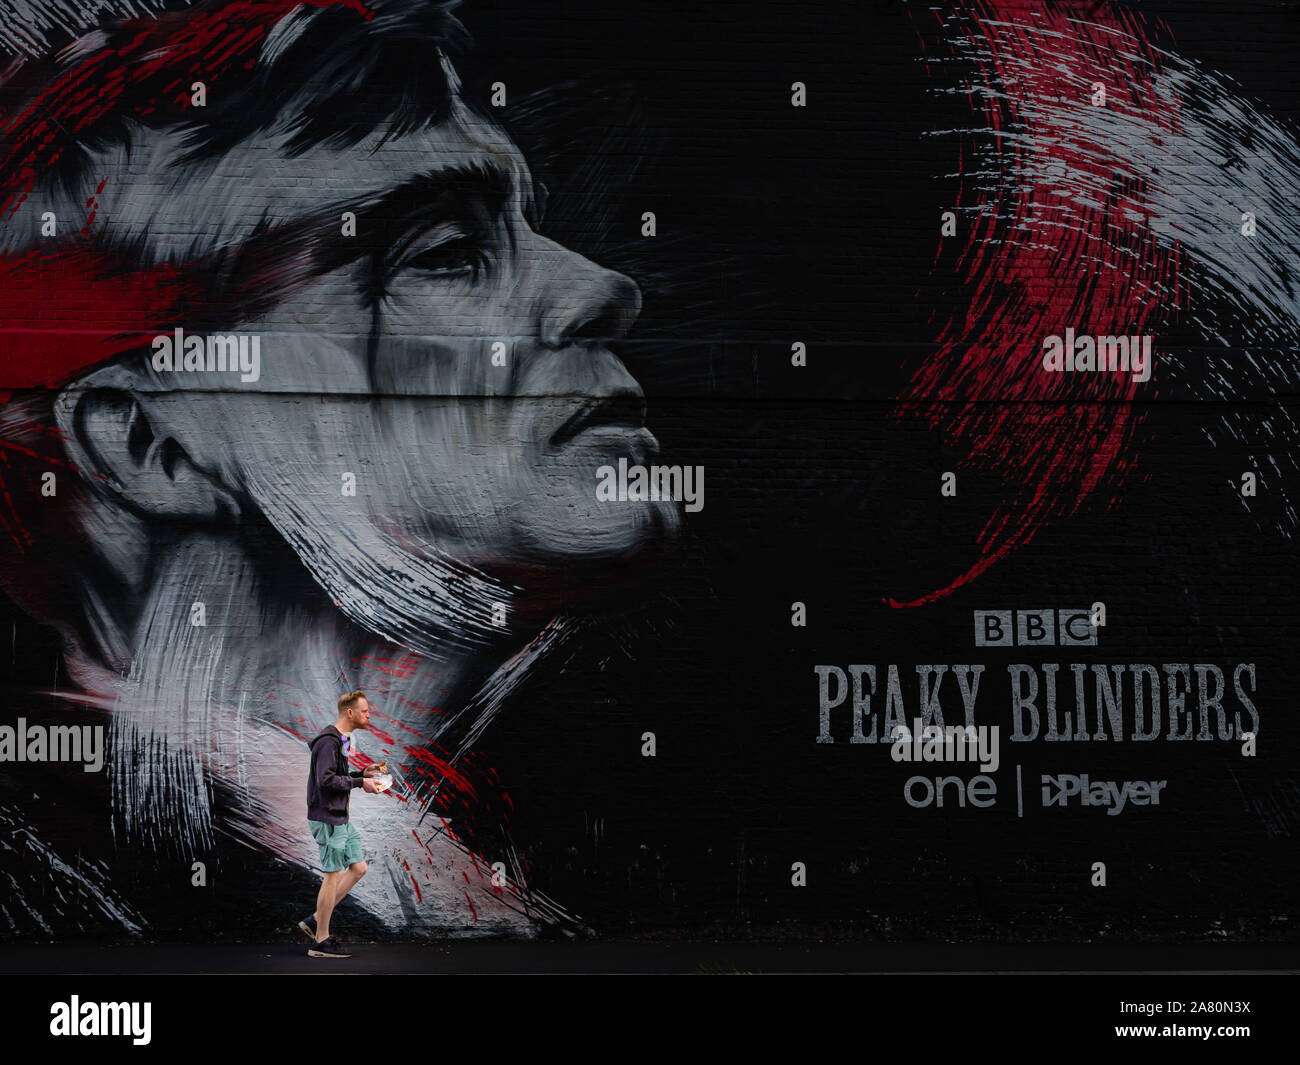 Man walking and eating in front of Peaky Blinders artistic graffiti on wall in london Stock Photo